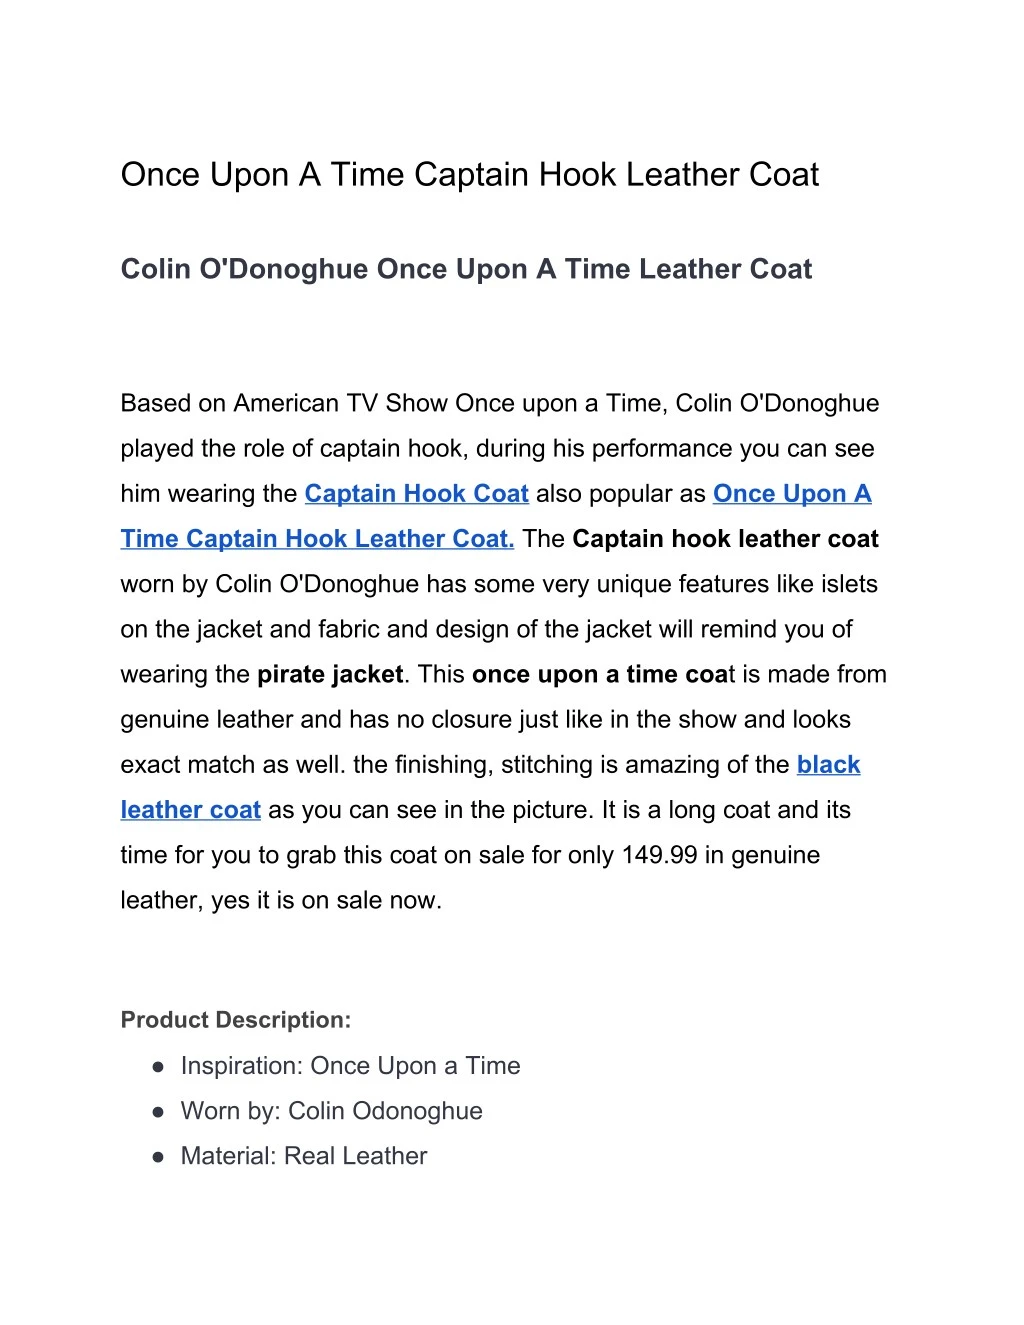 once upon a time captain hook leather coat